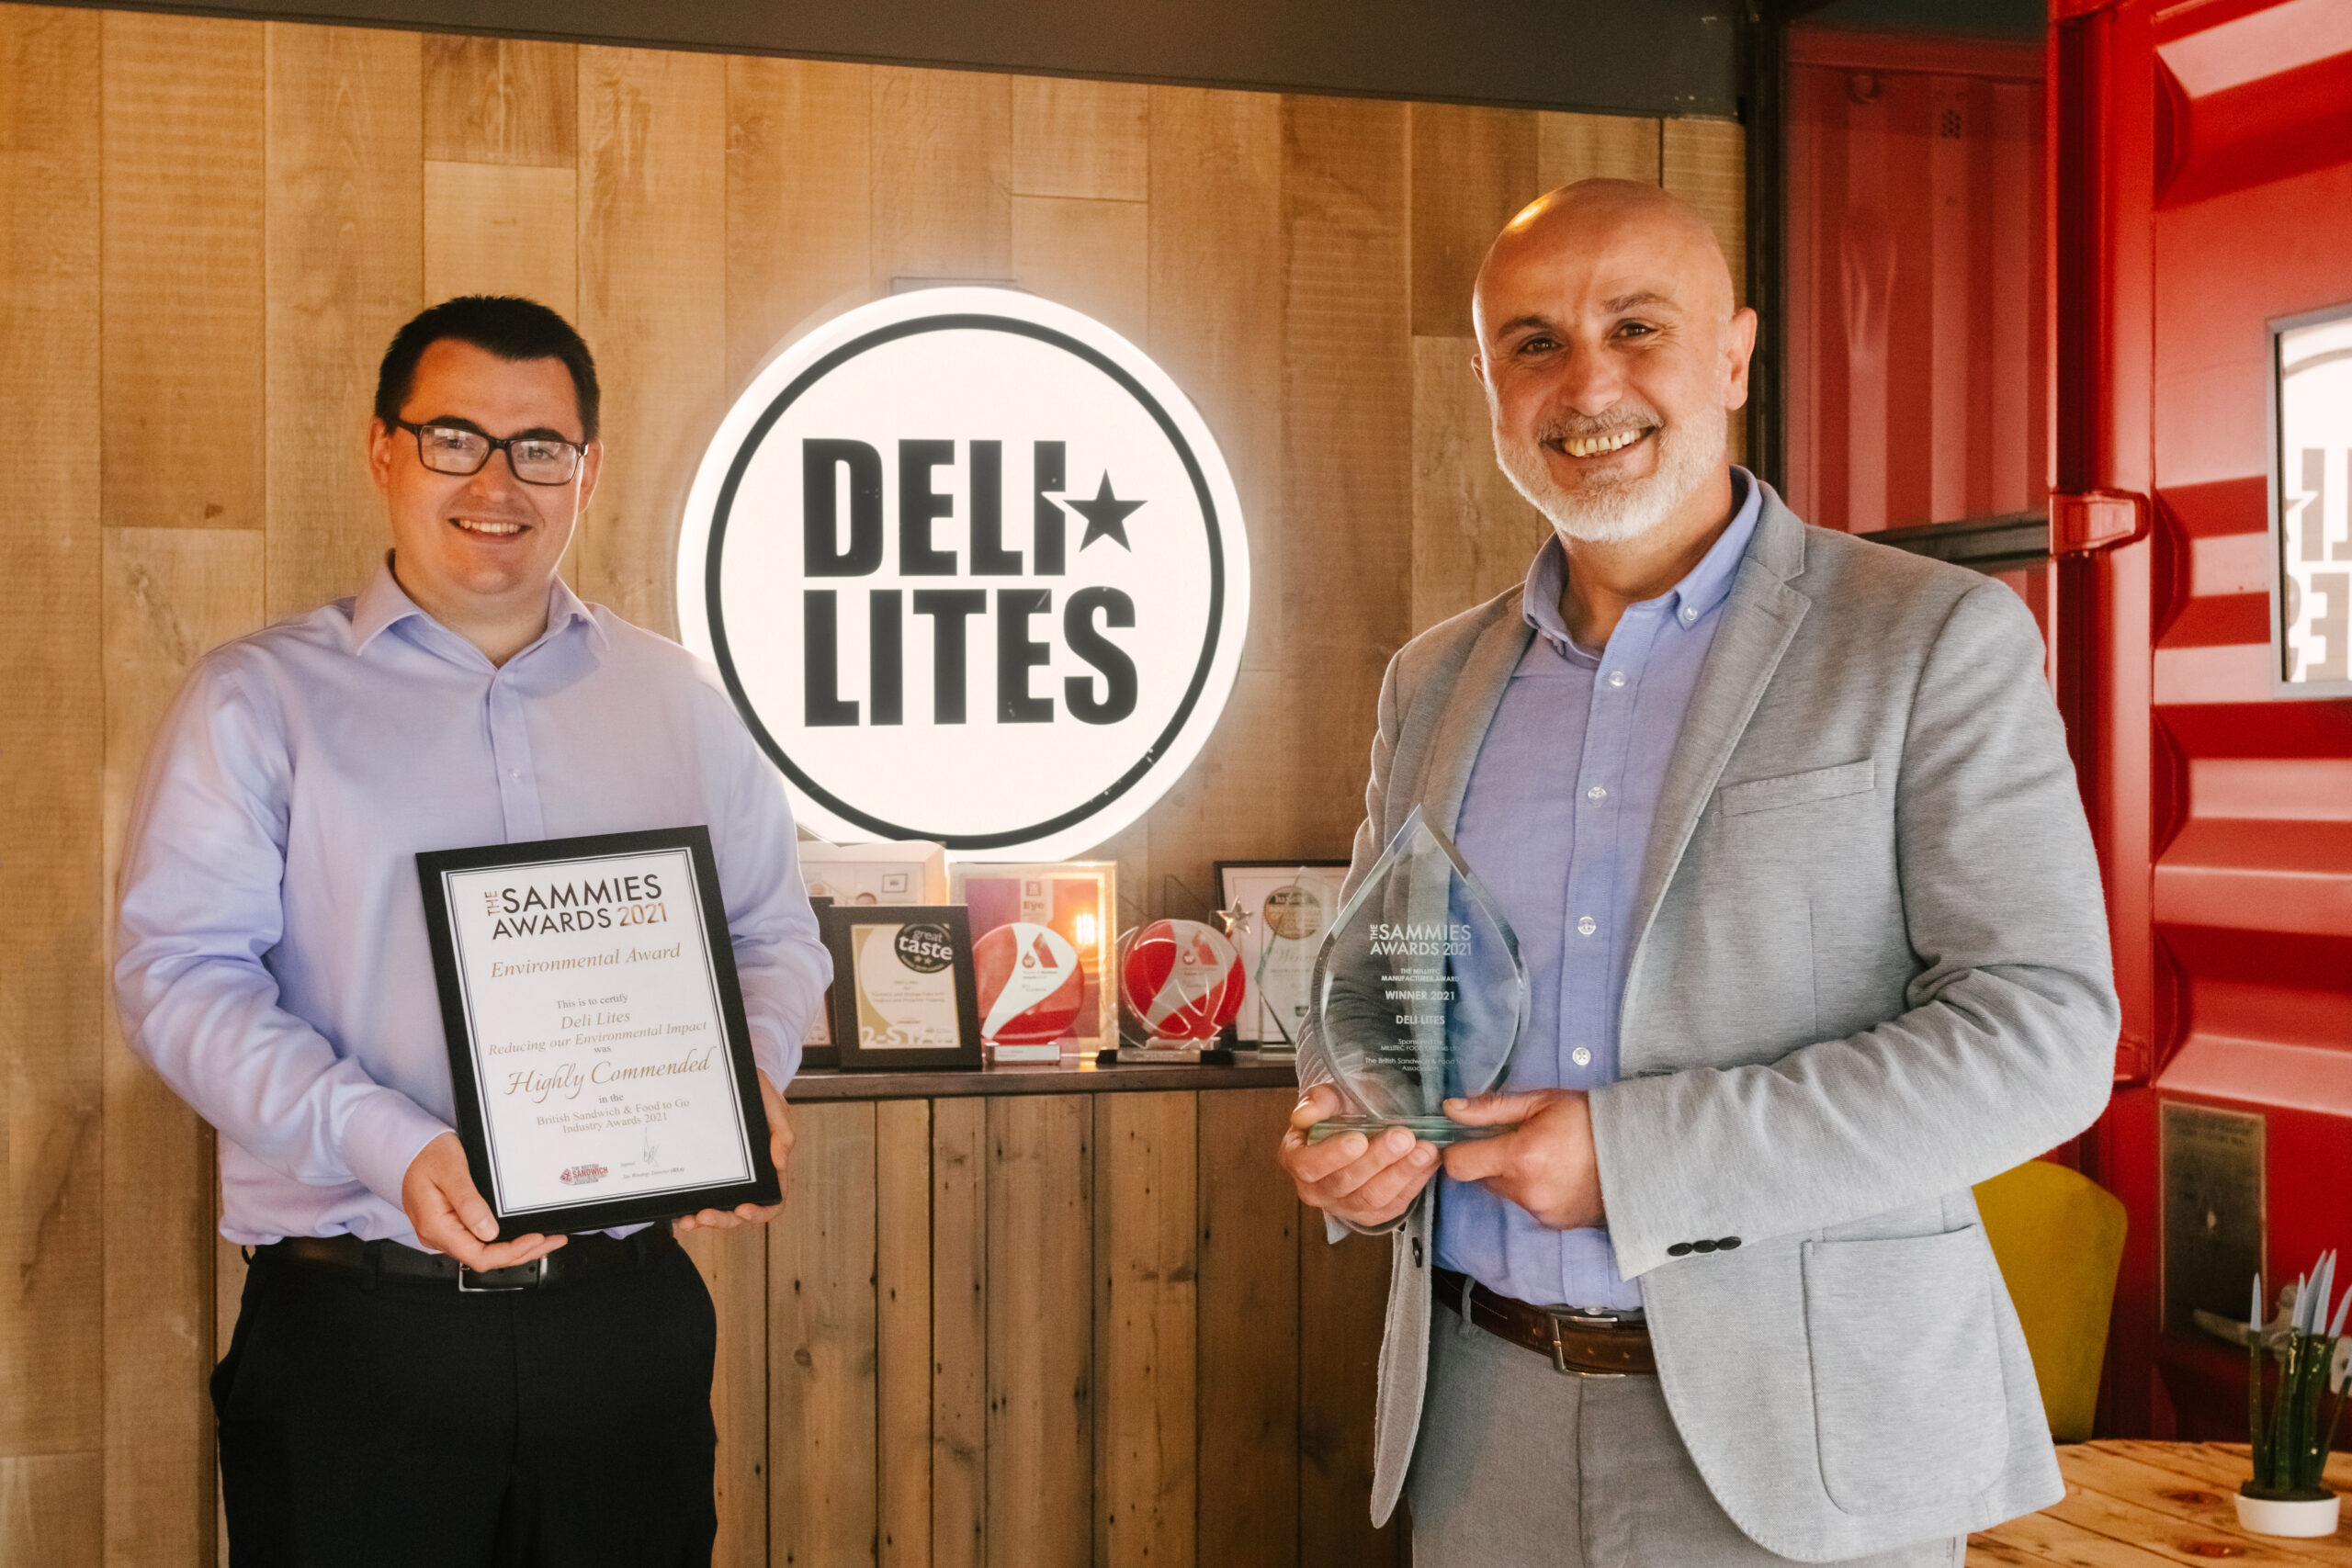 Deli Lites Wins Manufacturer of the Year at UK Sammies Awards - L-R - Cathal McDonnell with Ricky Hanbay - ni business news - belfast copywriter